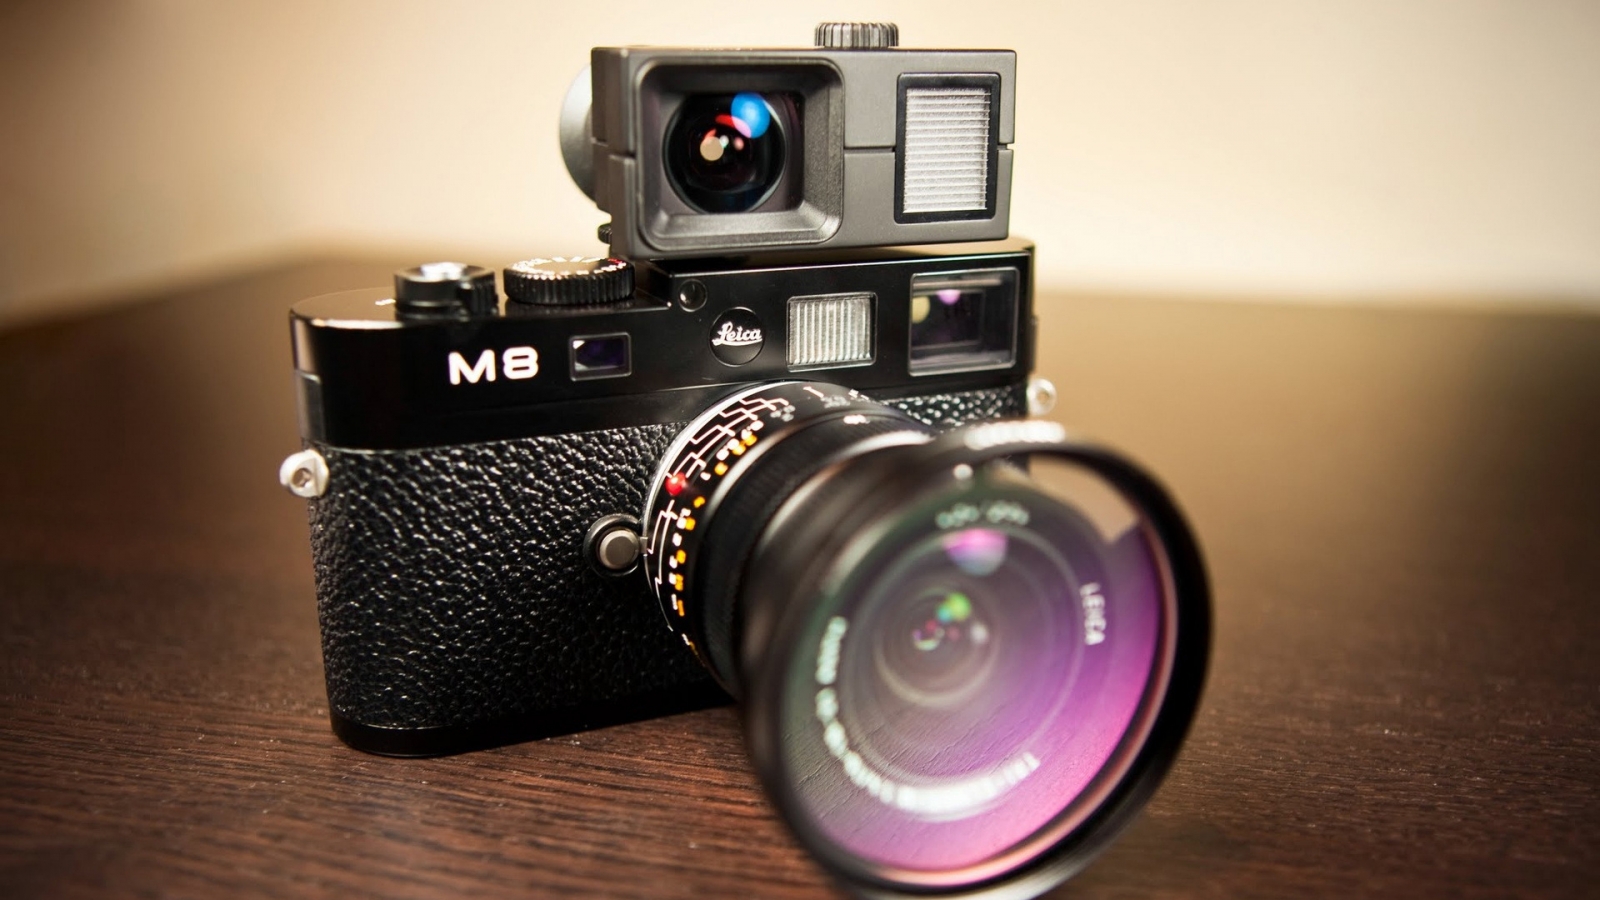 Leica M8 for 1600 x 900 HDTV resolution